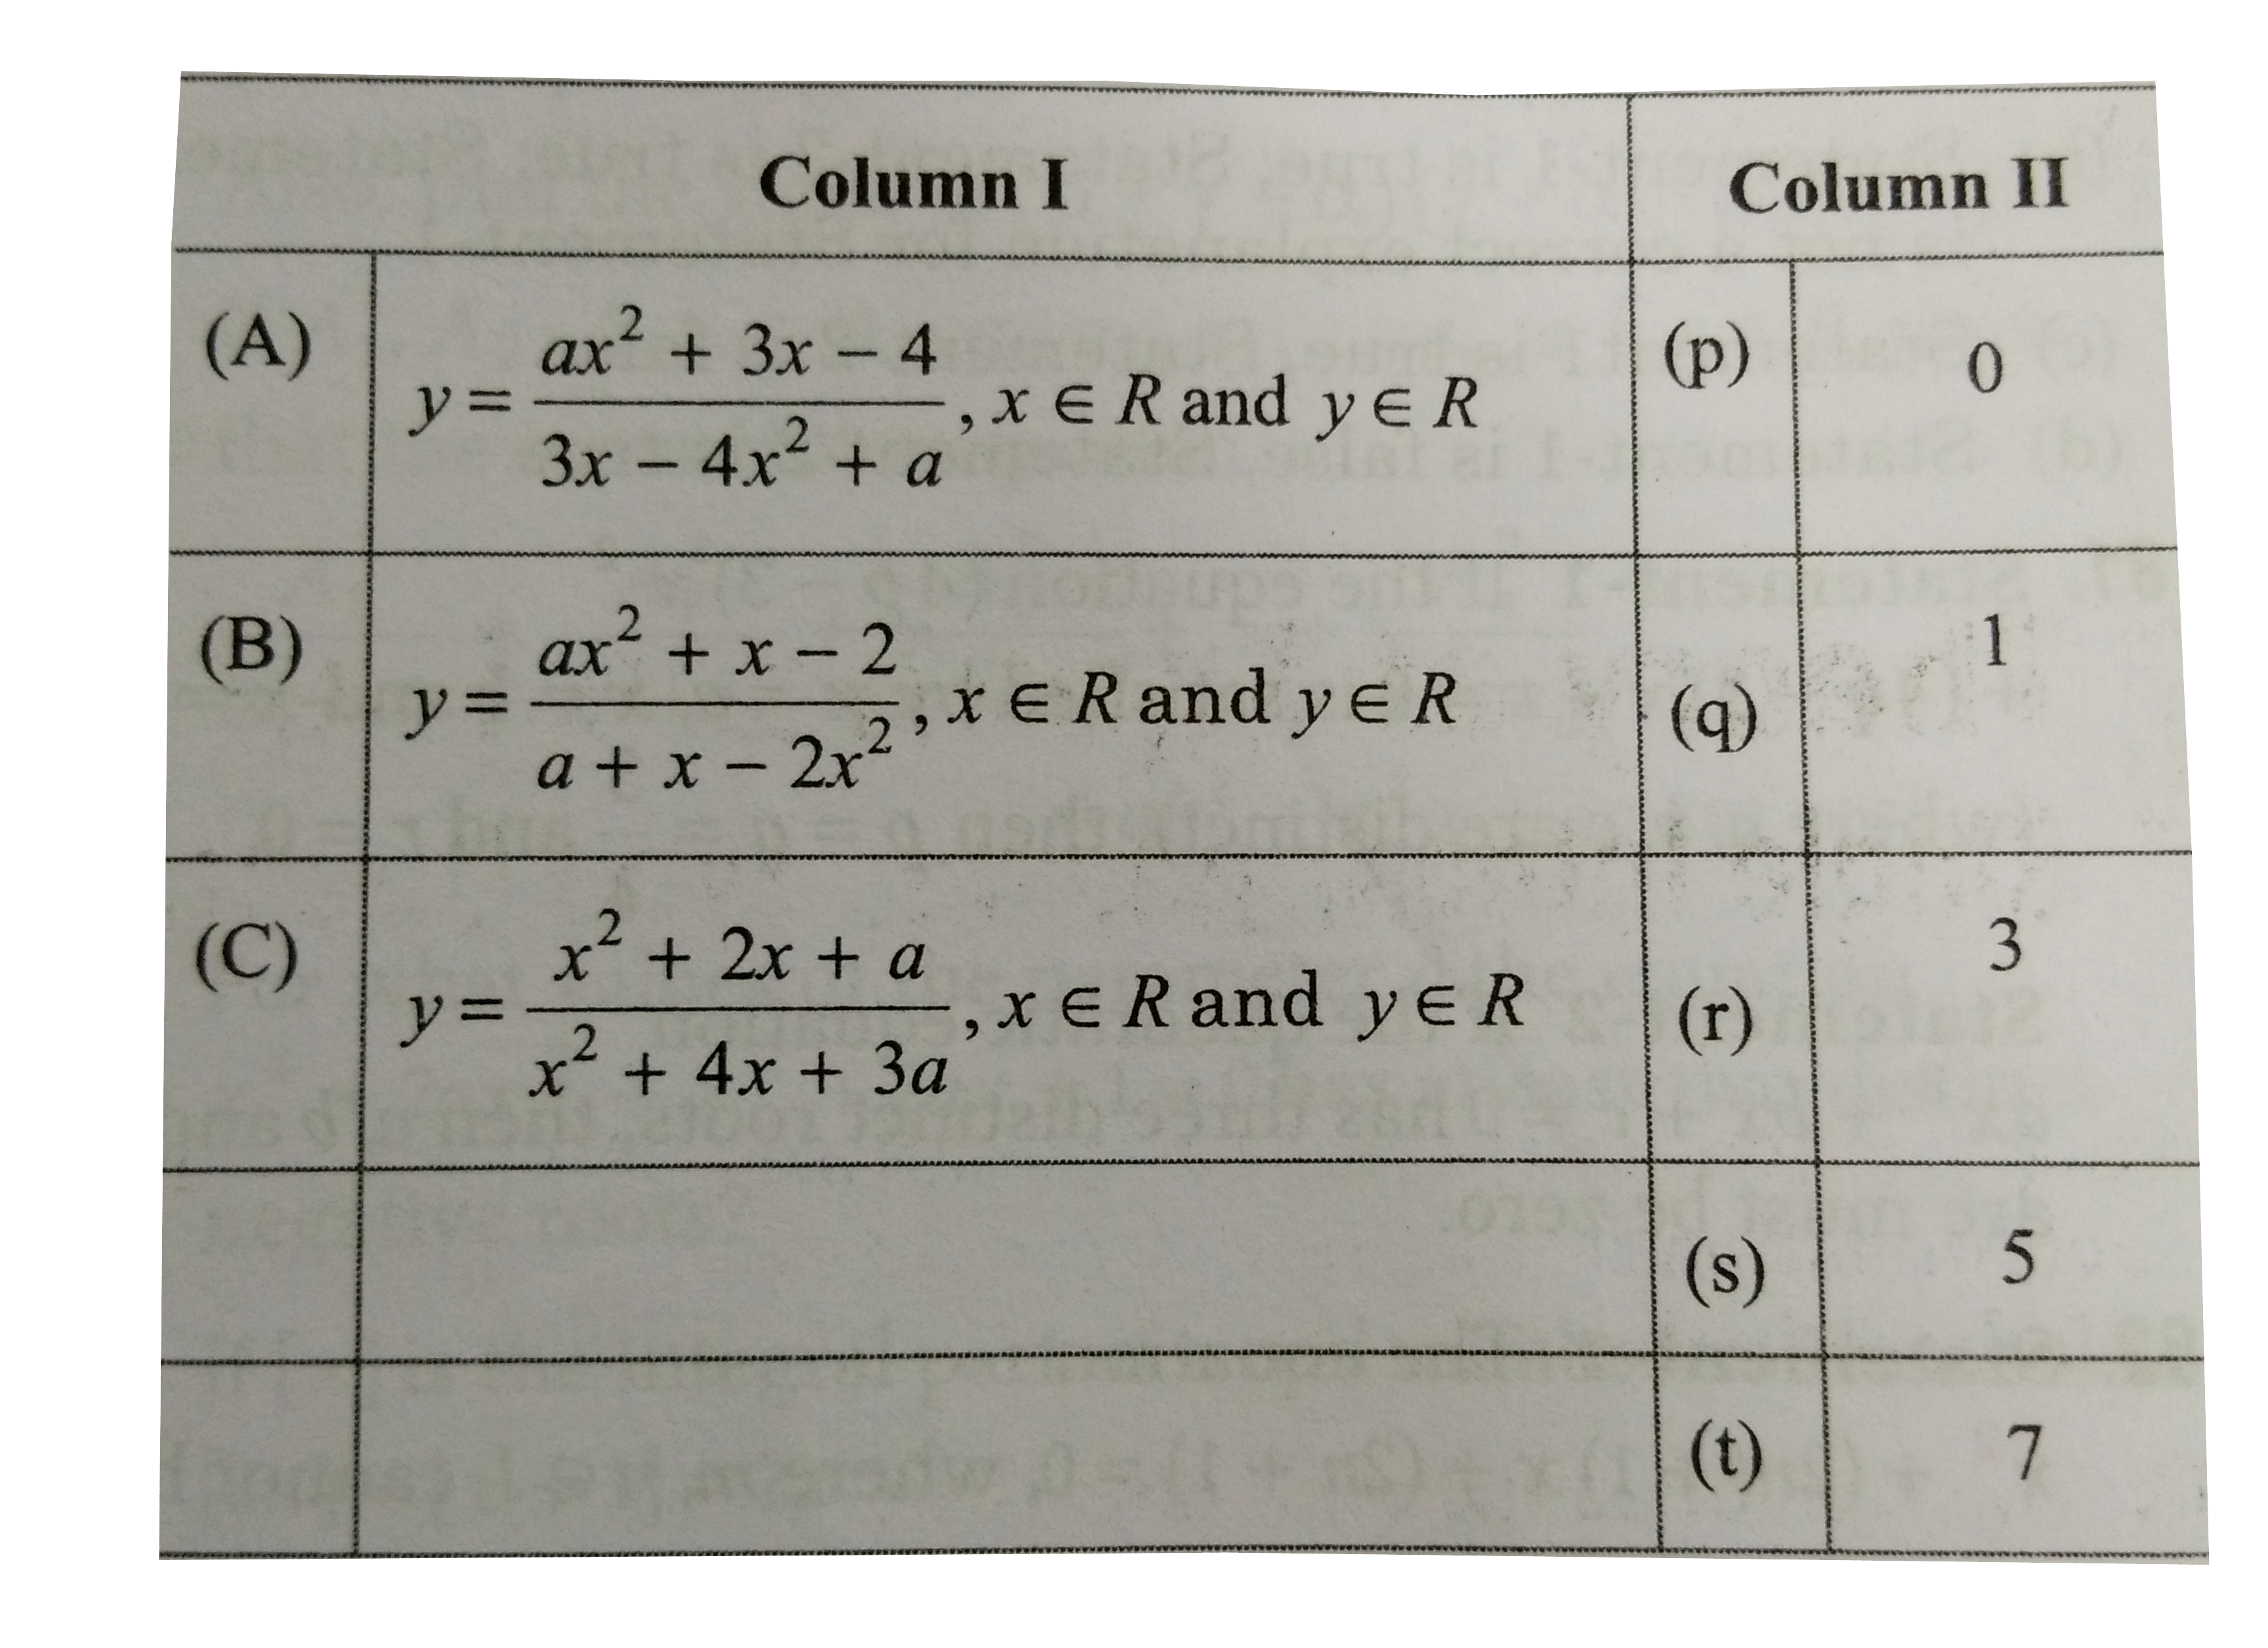 Column I contains rational algebraic expressions and Column II contains possible integers of a.